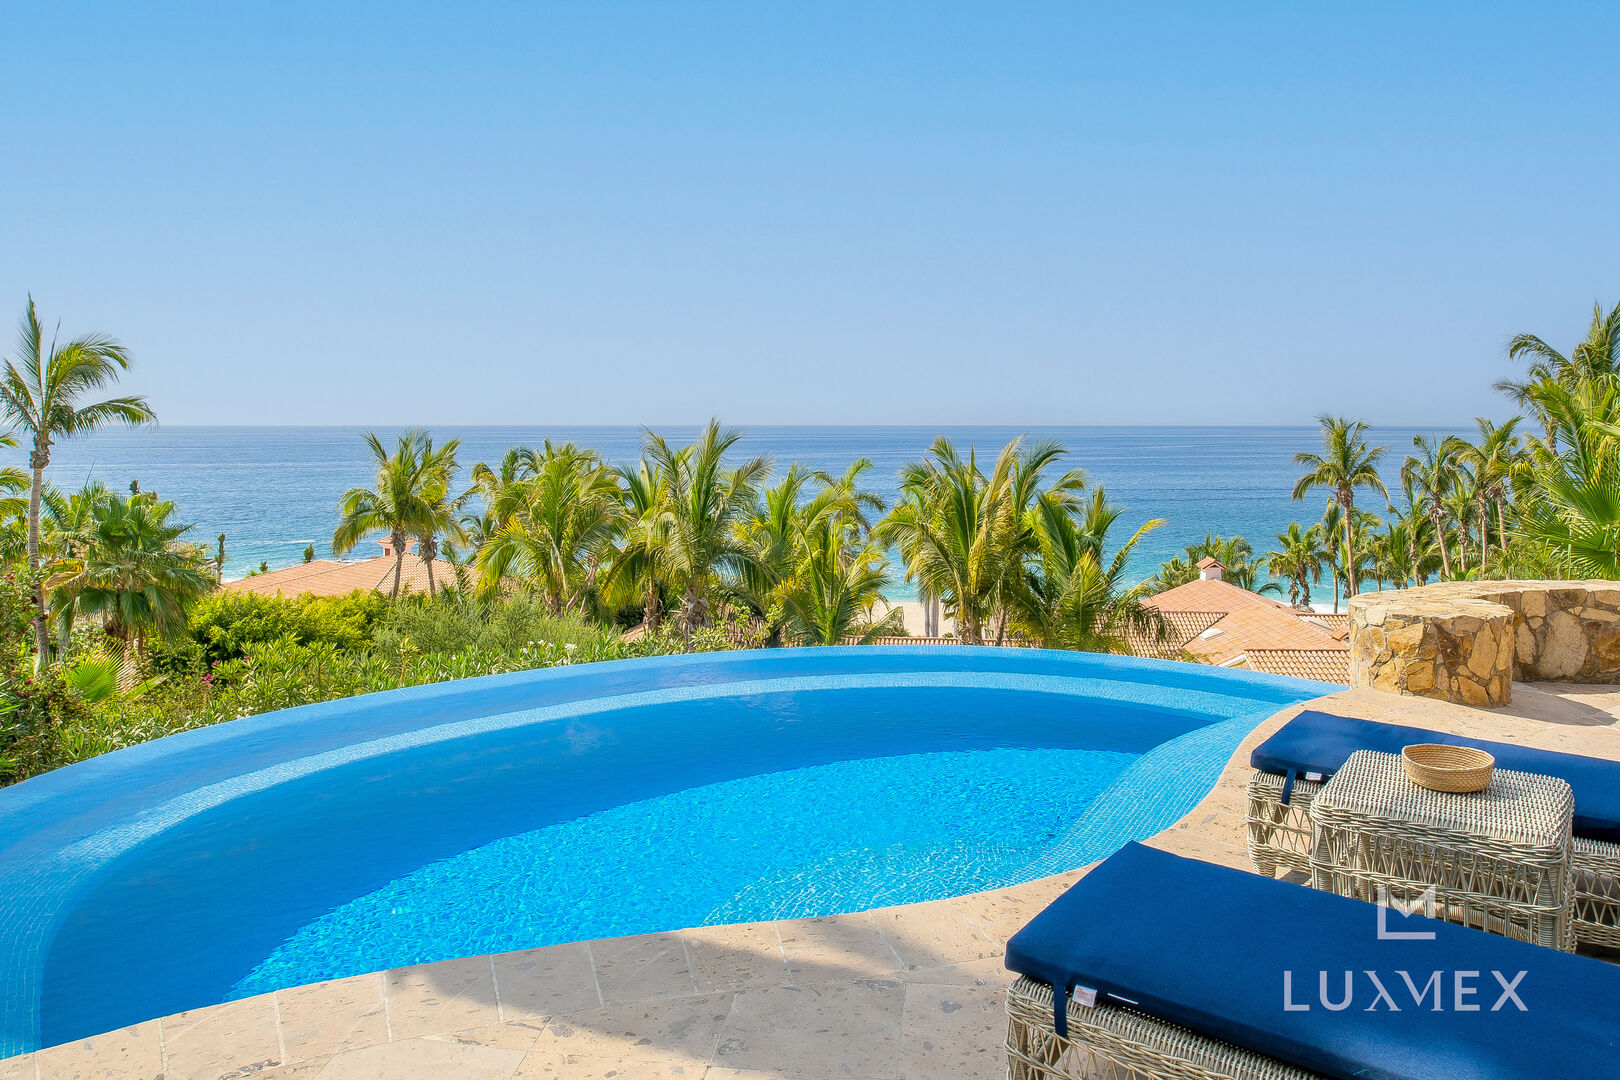 A closer view of this Los Cabos Luxury Vacation Villa's pool and pool chairs.